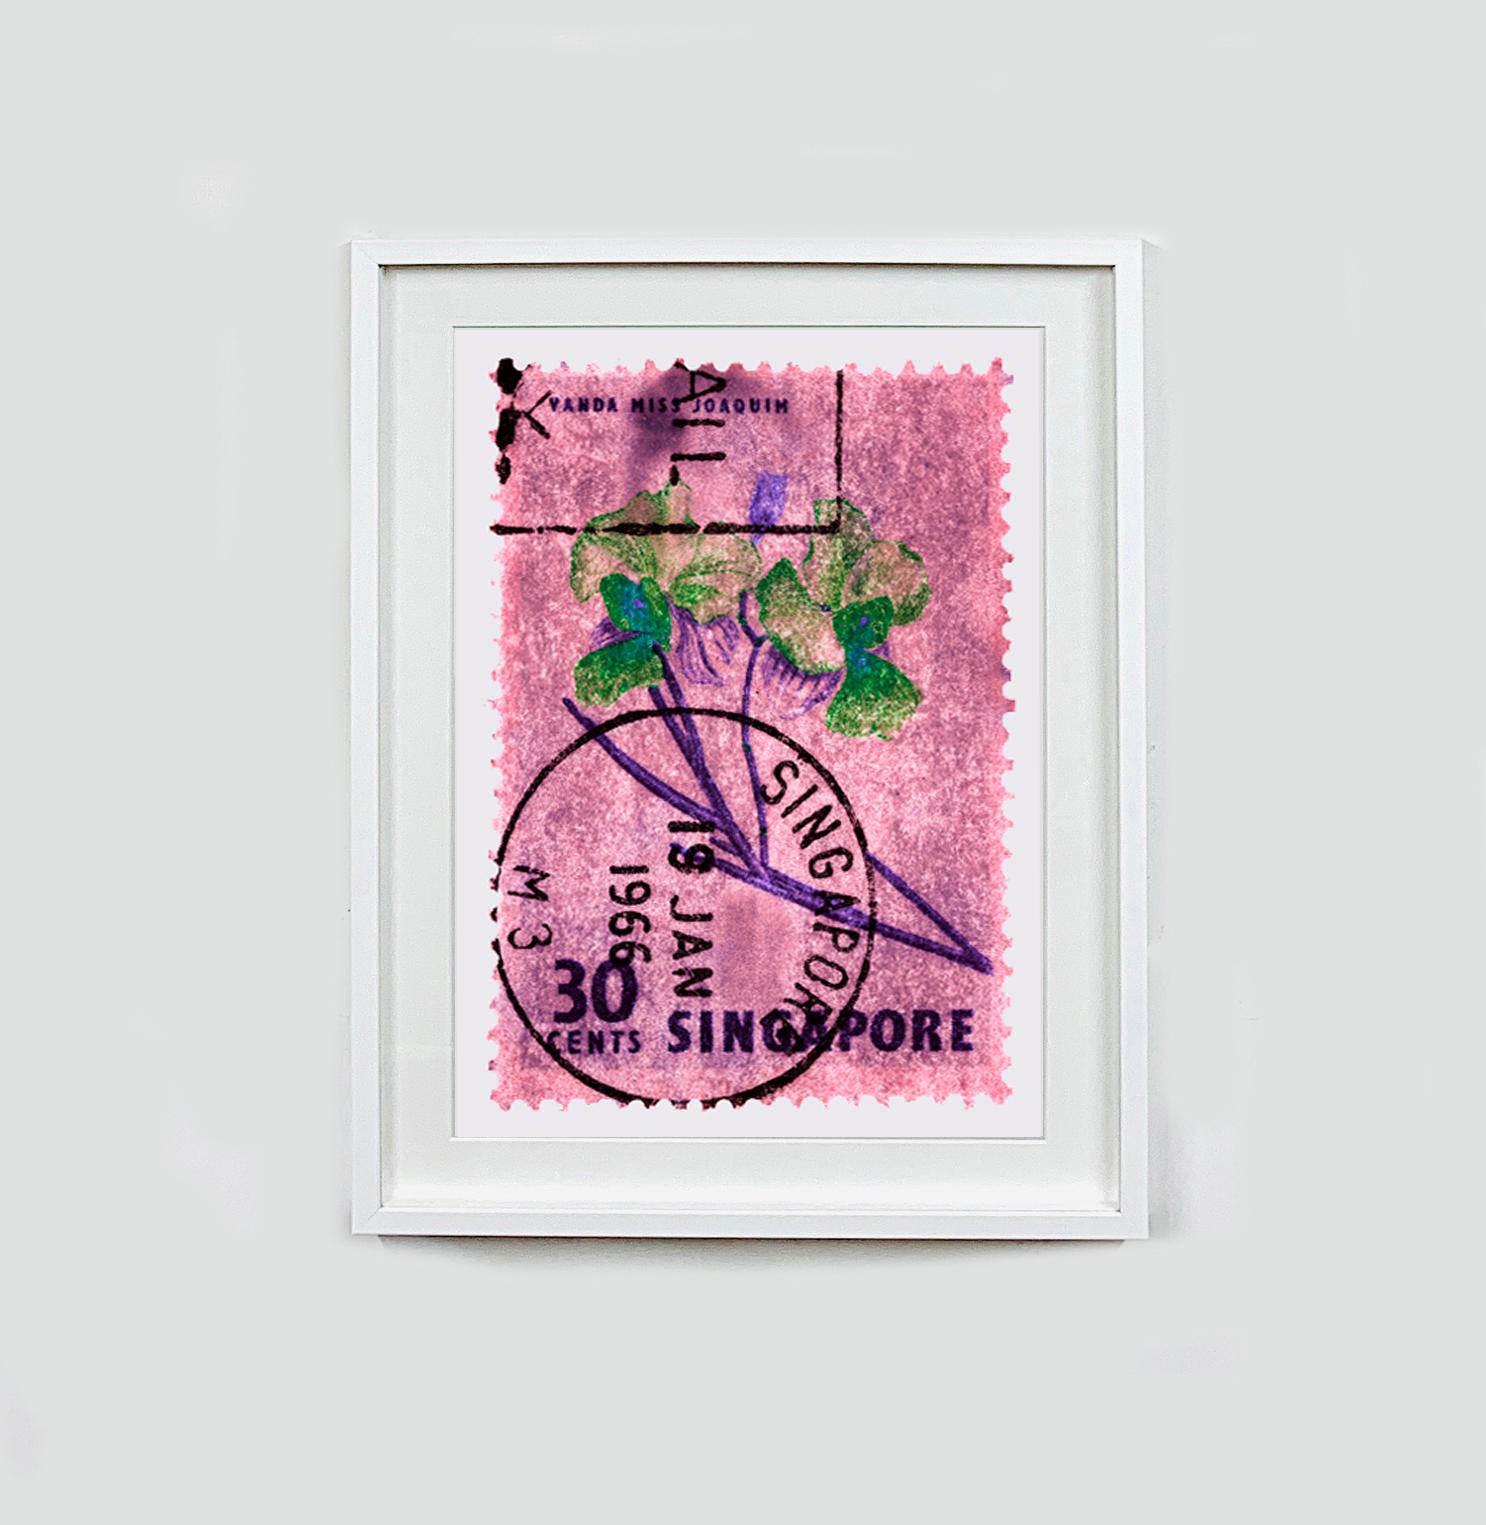 Singapore Stamp Collection, 30c Singapore Orchid Pink - Floral color photo - Pop Art Photograph by Heidler & Heeps